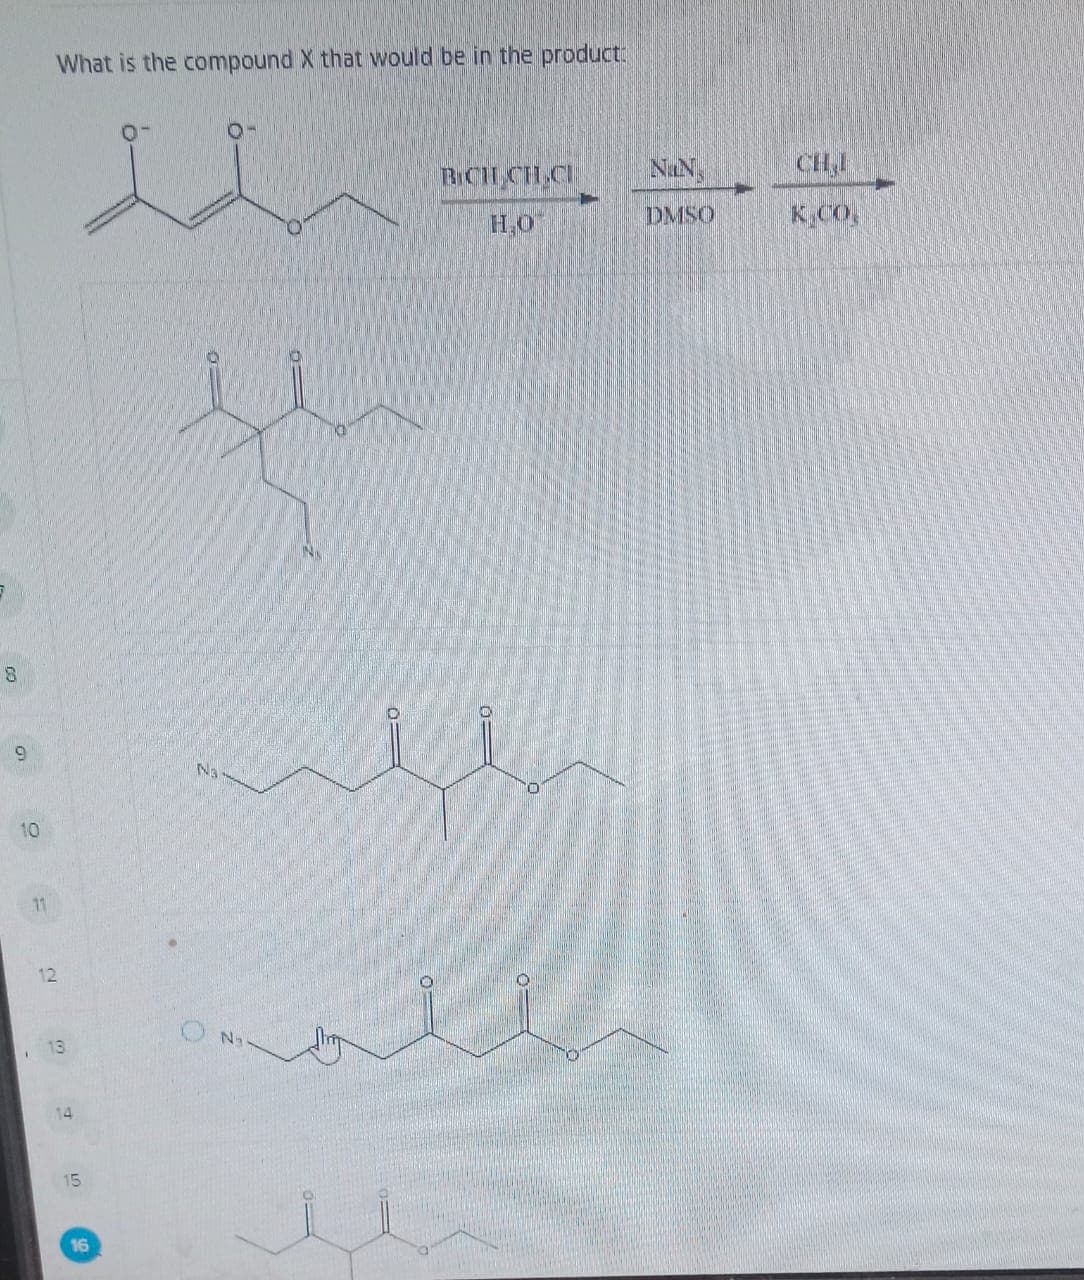 8
What is the compound X that would be in the product:
9
Na
10
11
12
13
Na
14
15
16
BICH CHCI
NIN
CHI
HO
DMSO
K.CO